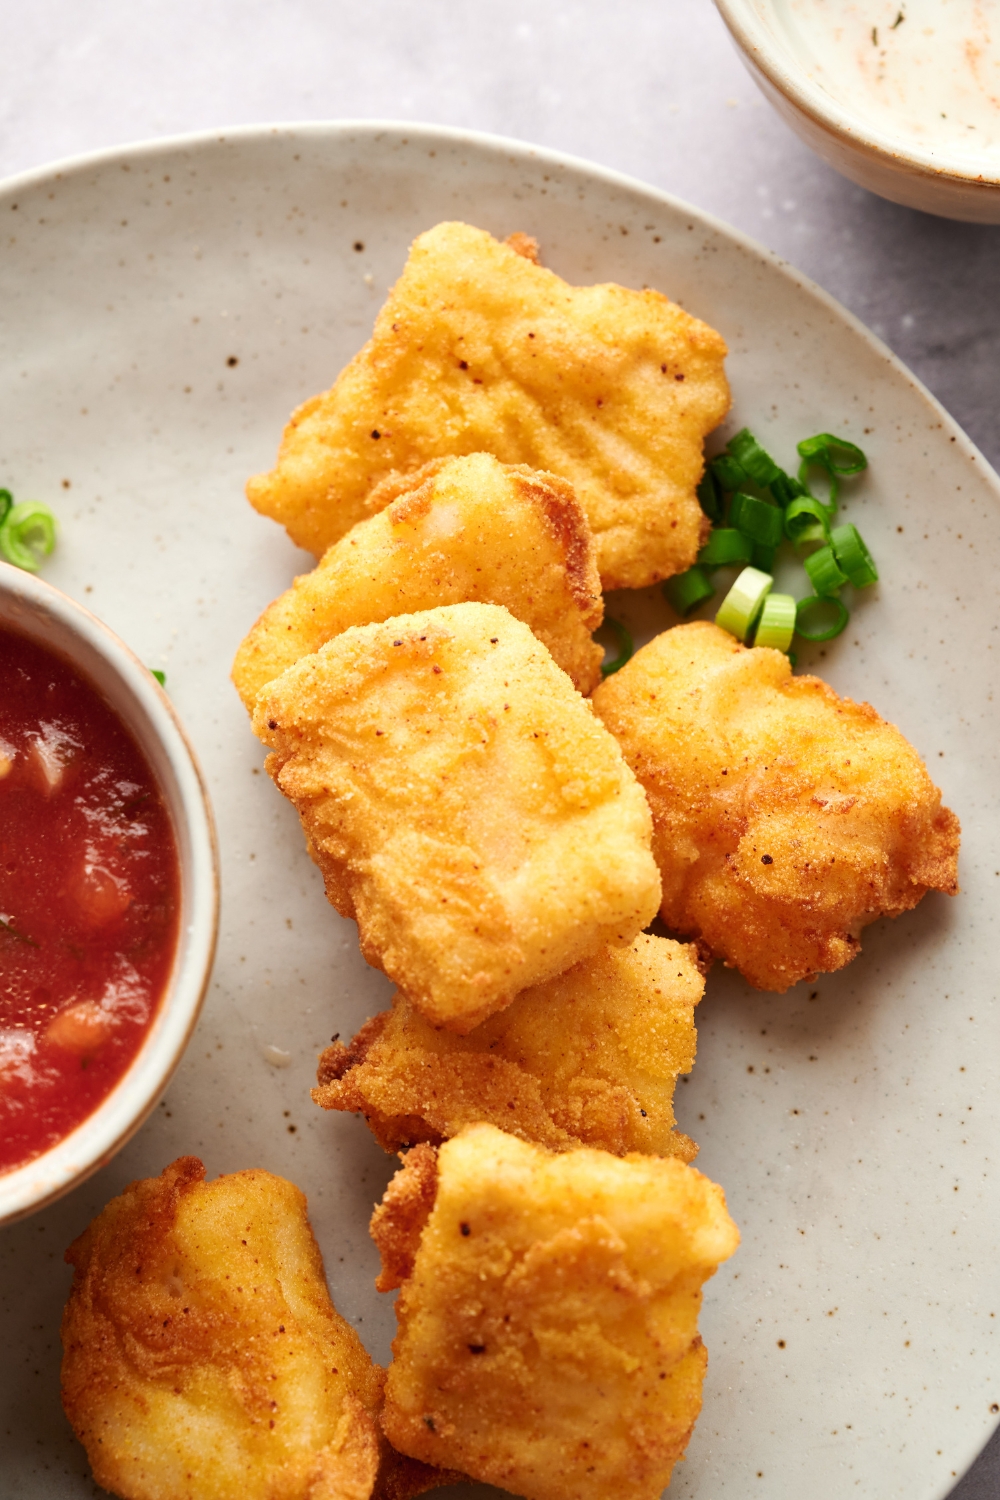 Golden brown catfish nuggets on a serving plate with a small bowl of red dipping sauce.